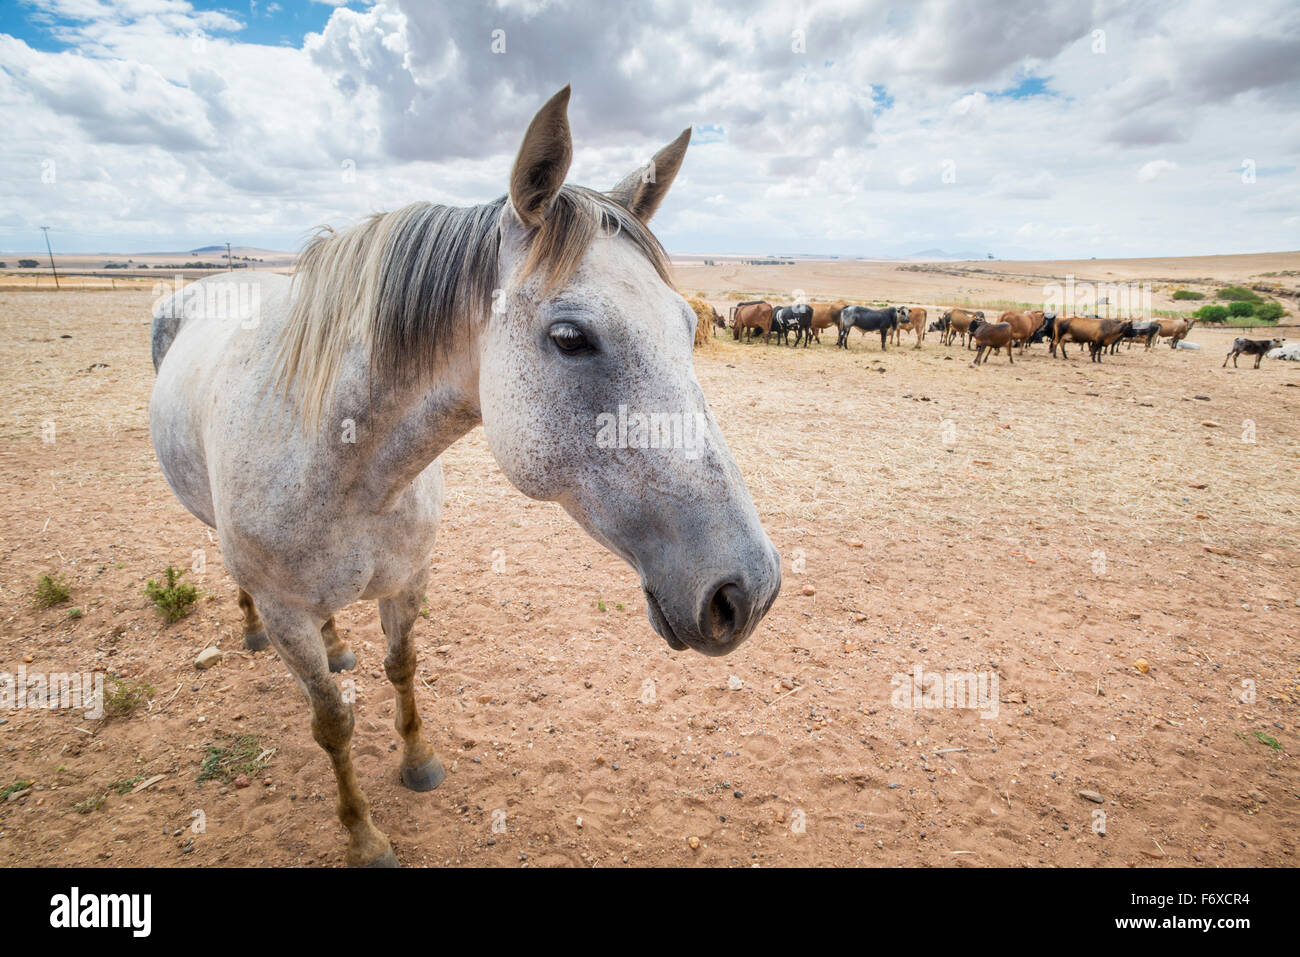 Horse with cows in the background; Cape Town, Western Cape, South Africa Stock Photo